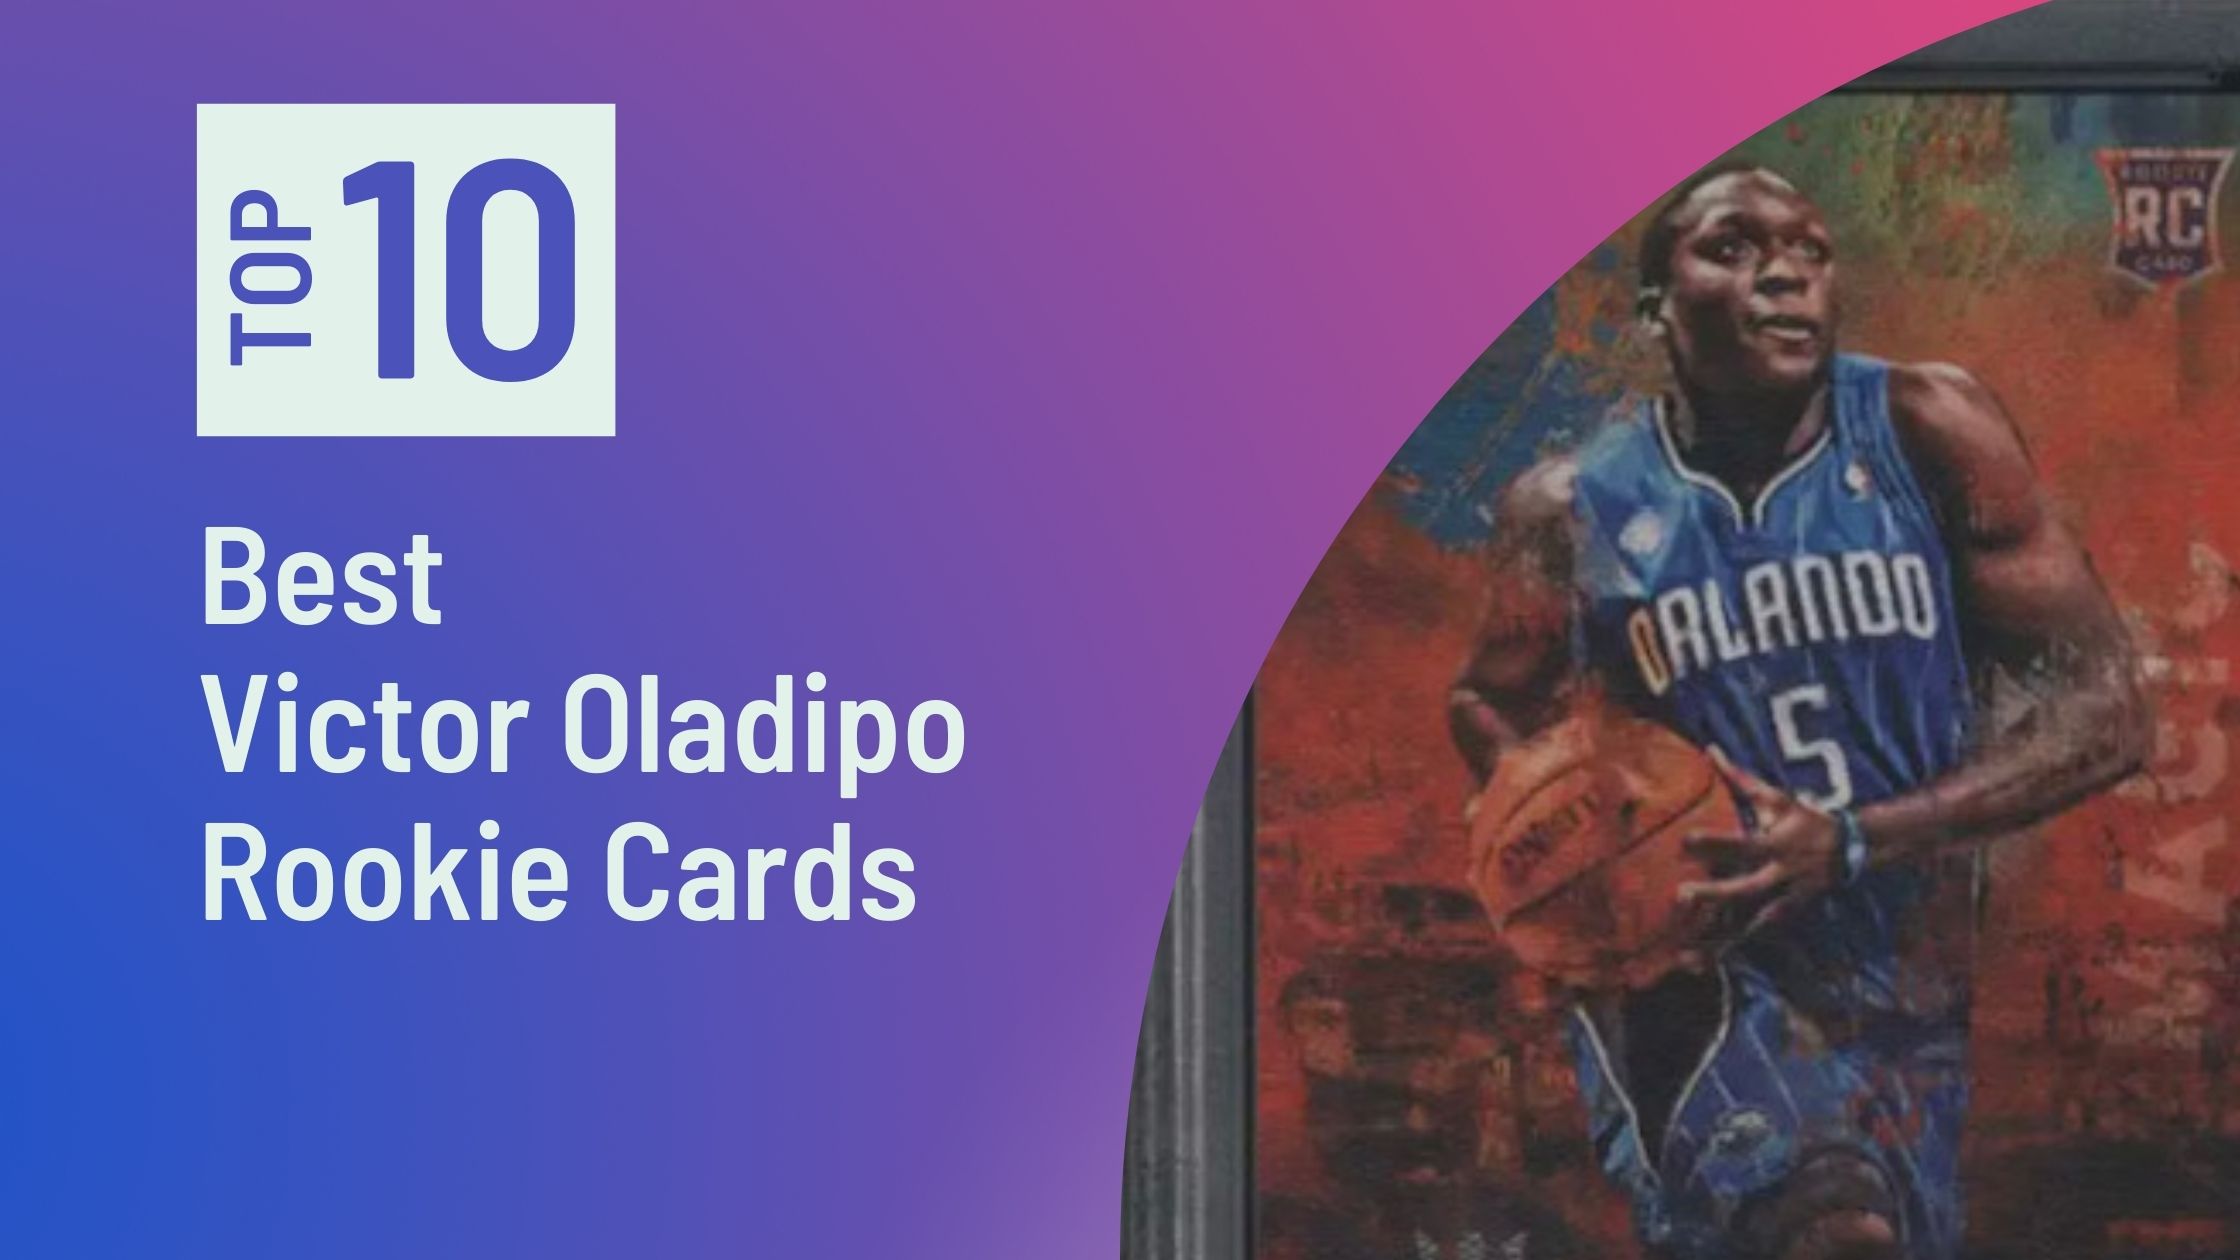 Featured Image for the Best Victor Oladipo Rookie Cards blog post